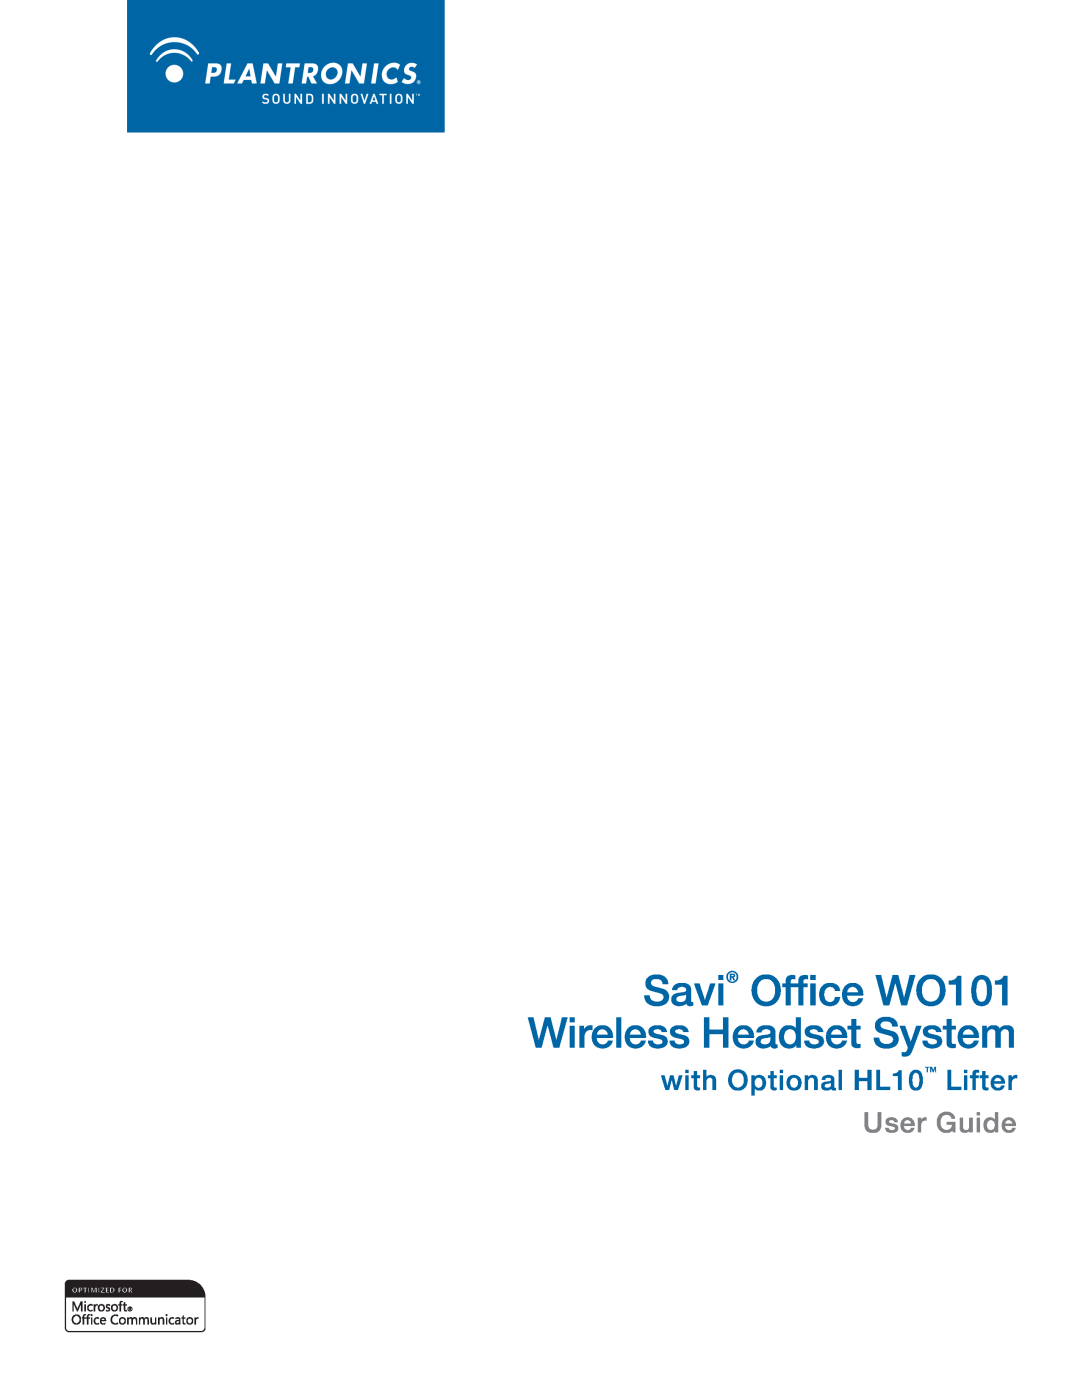 Plantronics manual Savi Office WO101 Wireless Headset System, with Optional HL10 Lifter User Guide 